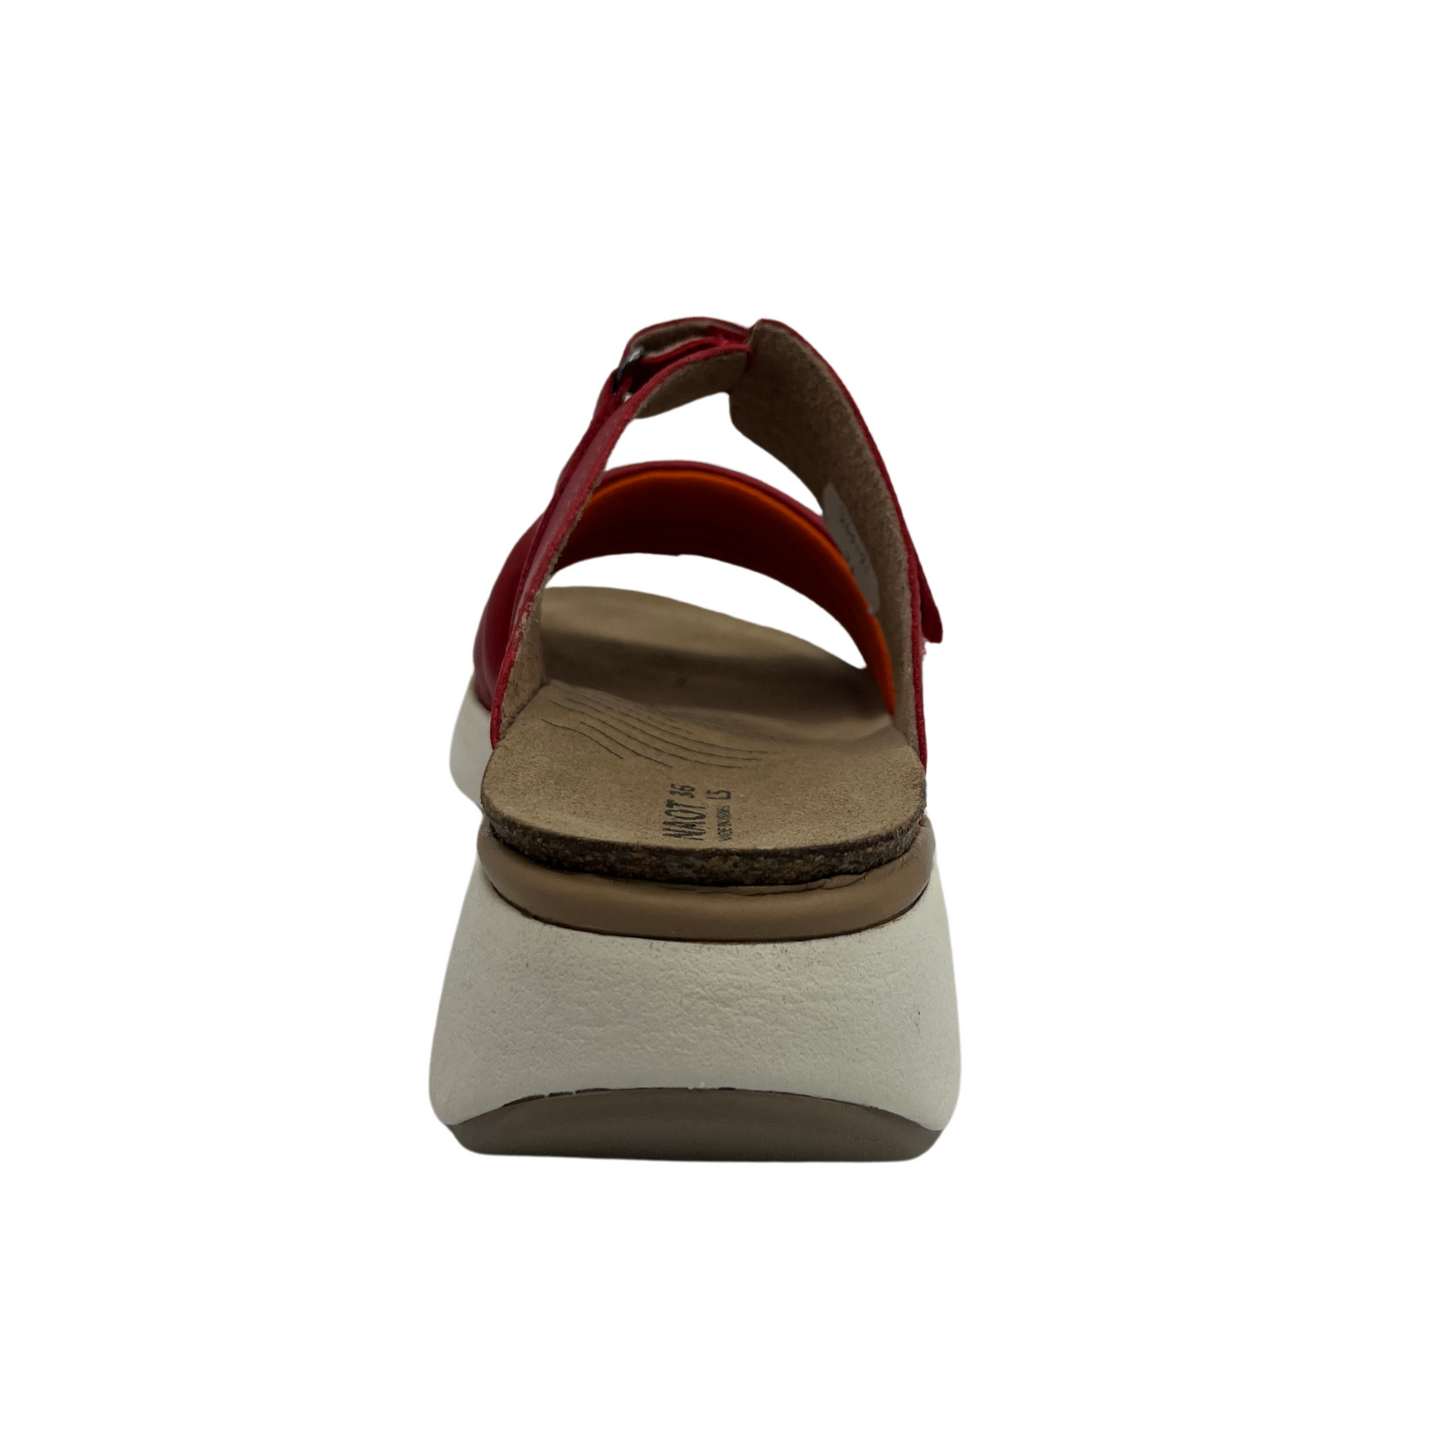 Back view of red leather slip on sandal with white rubber outsole, padded front strap and open toe